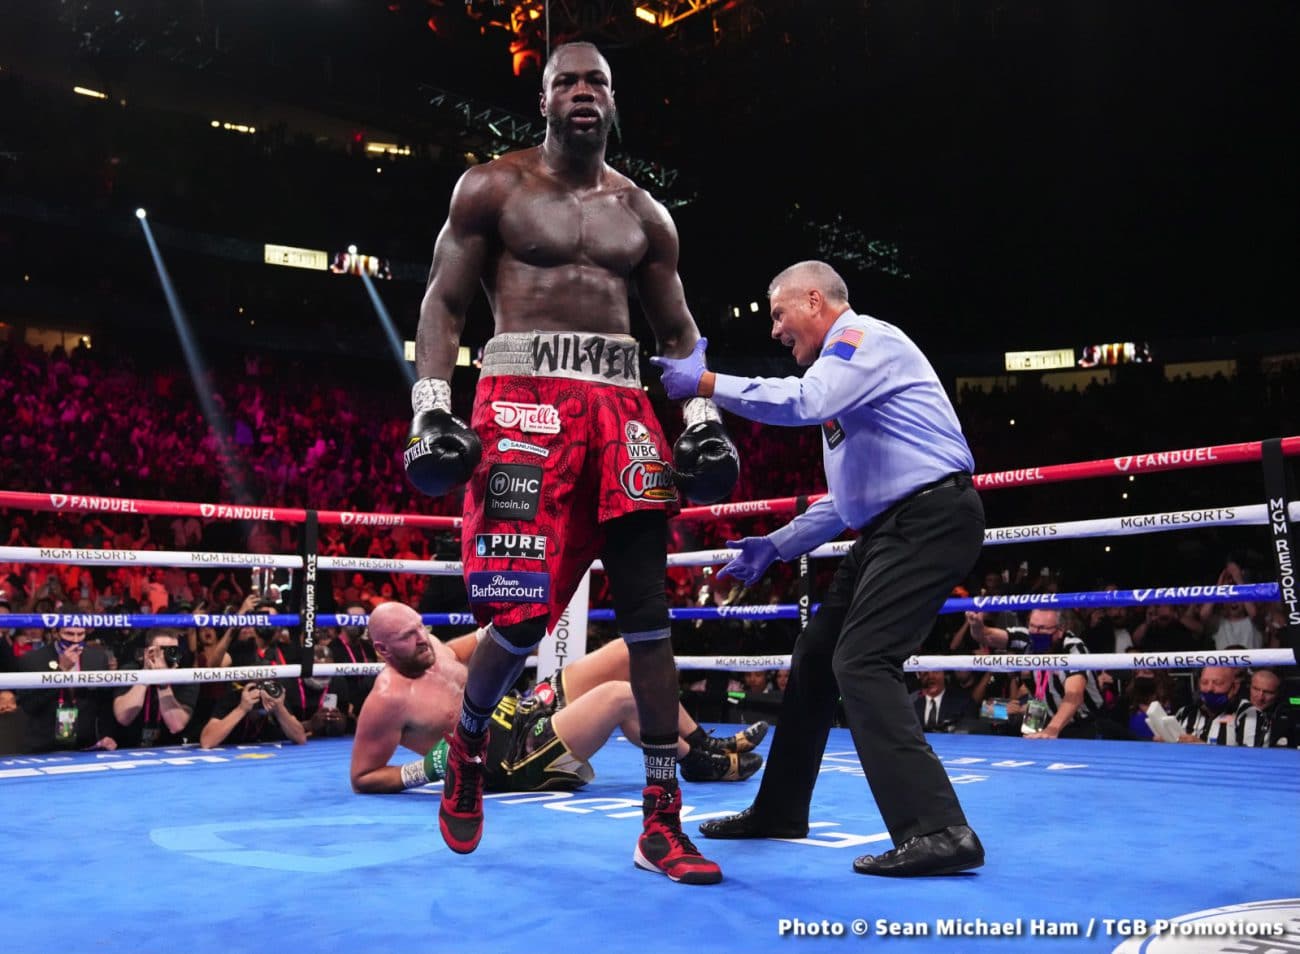 Image: Deontay Wilder wants to inflict pain on Tyson Fury